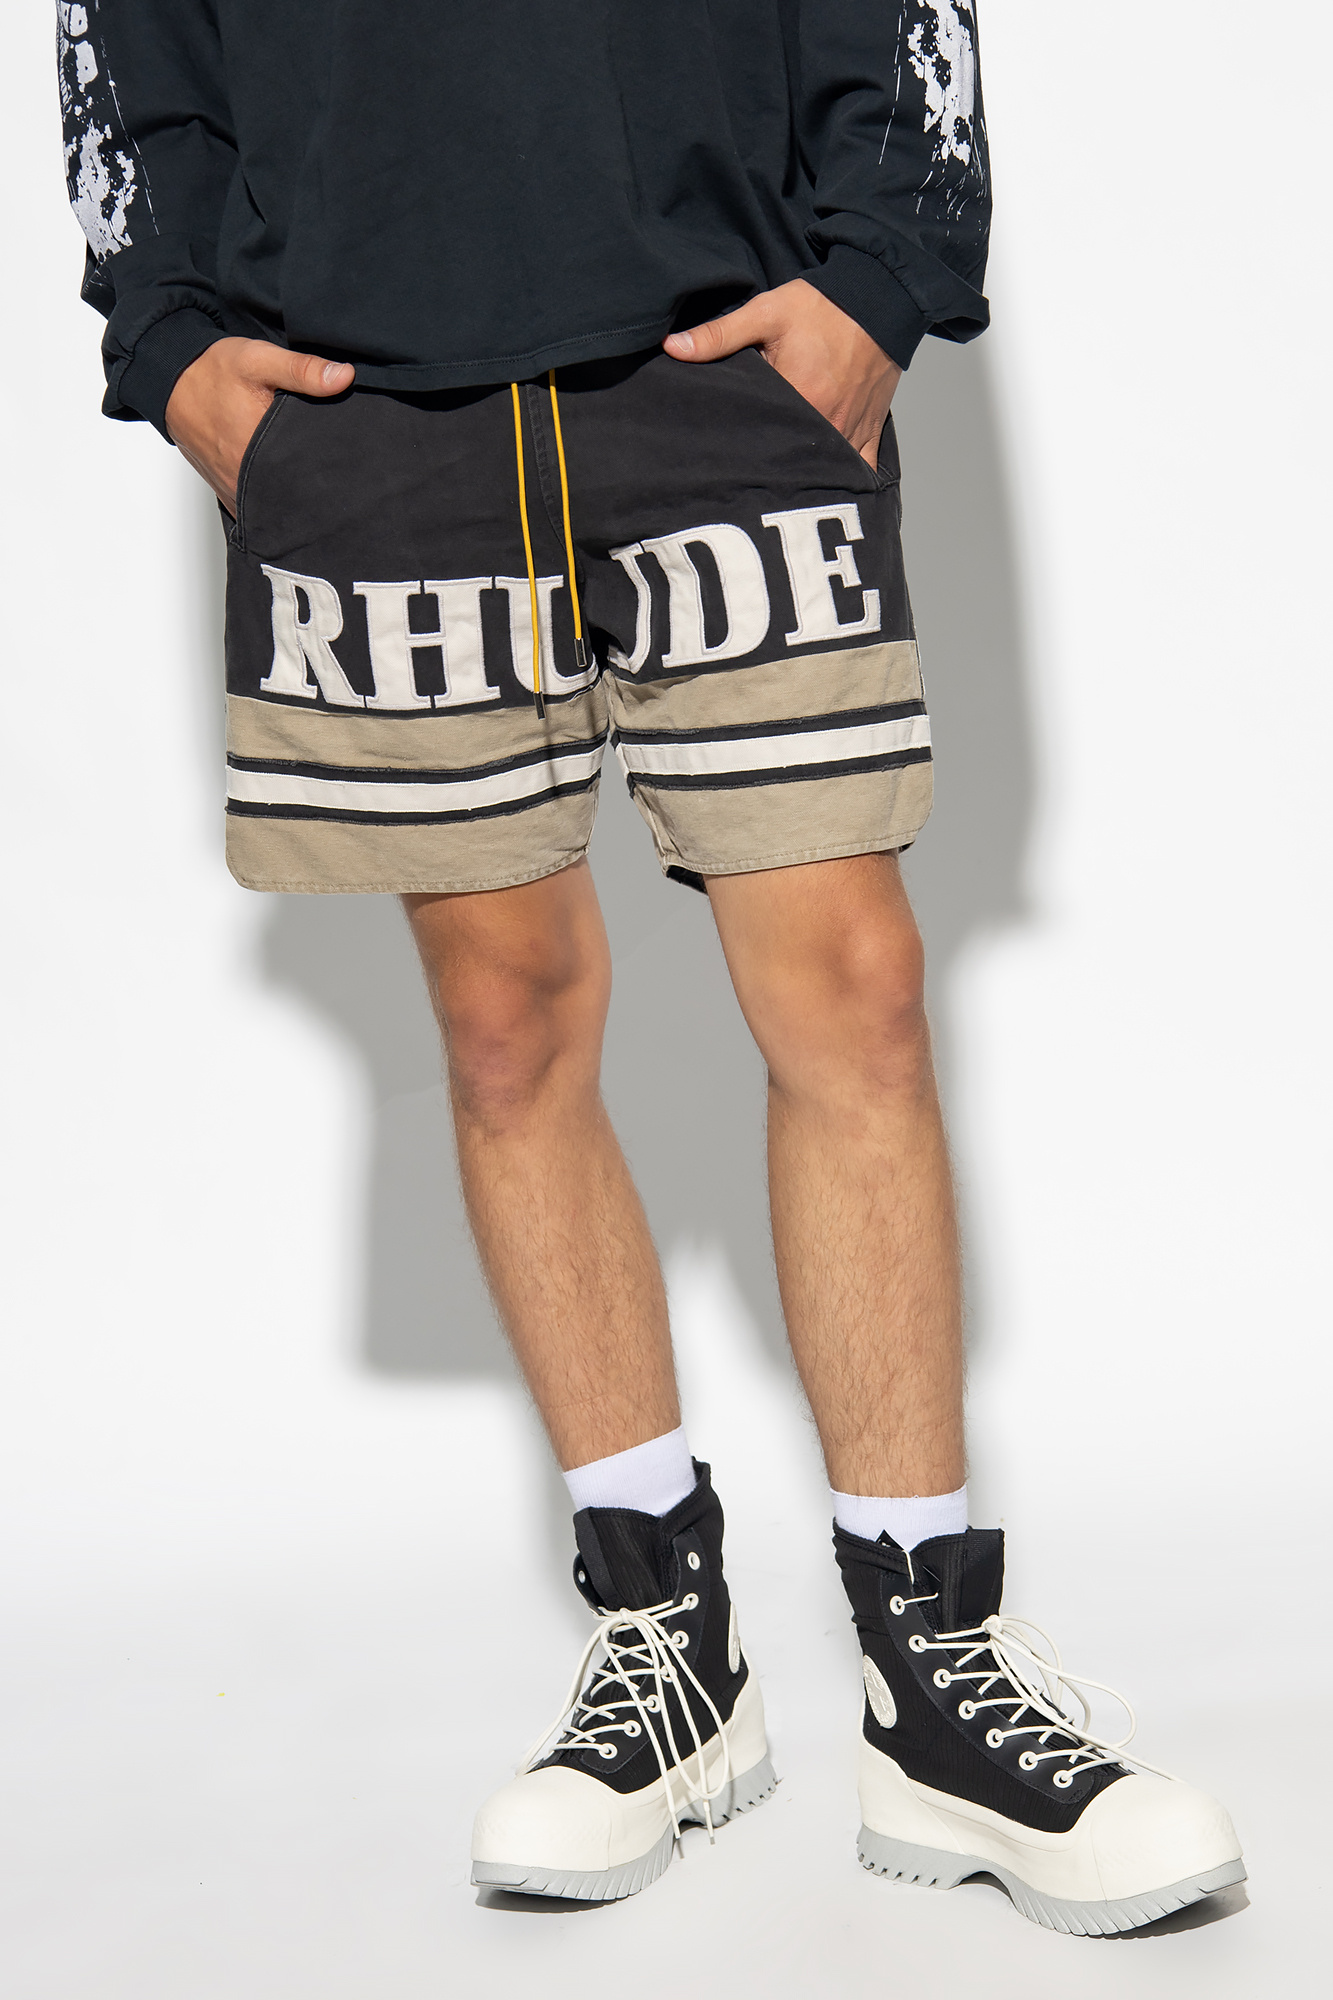 Rhude shorts – what are the fashionable styles?插图4